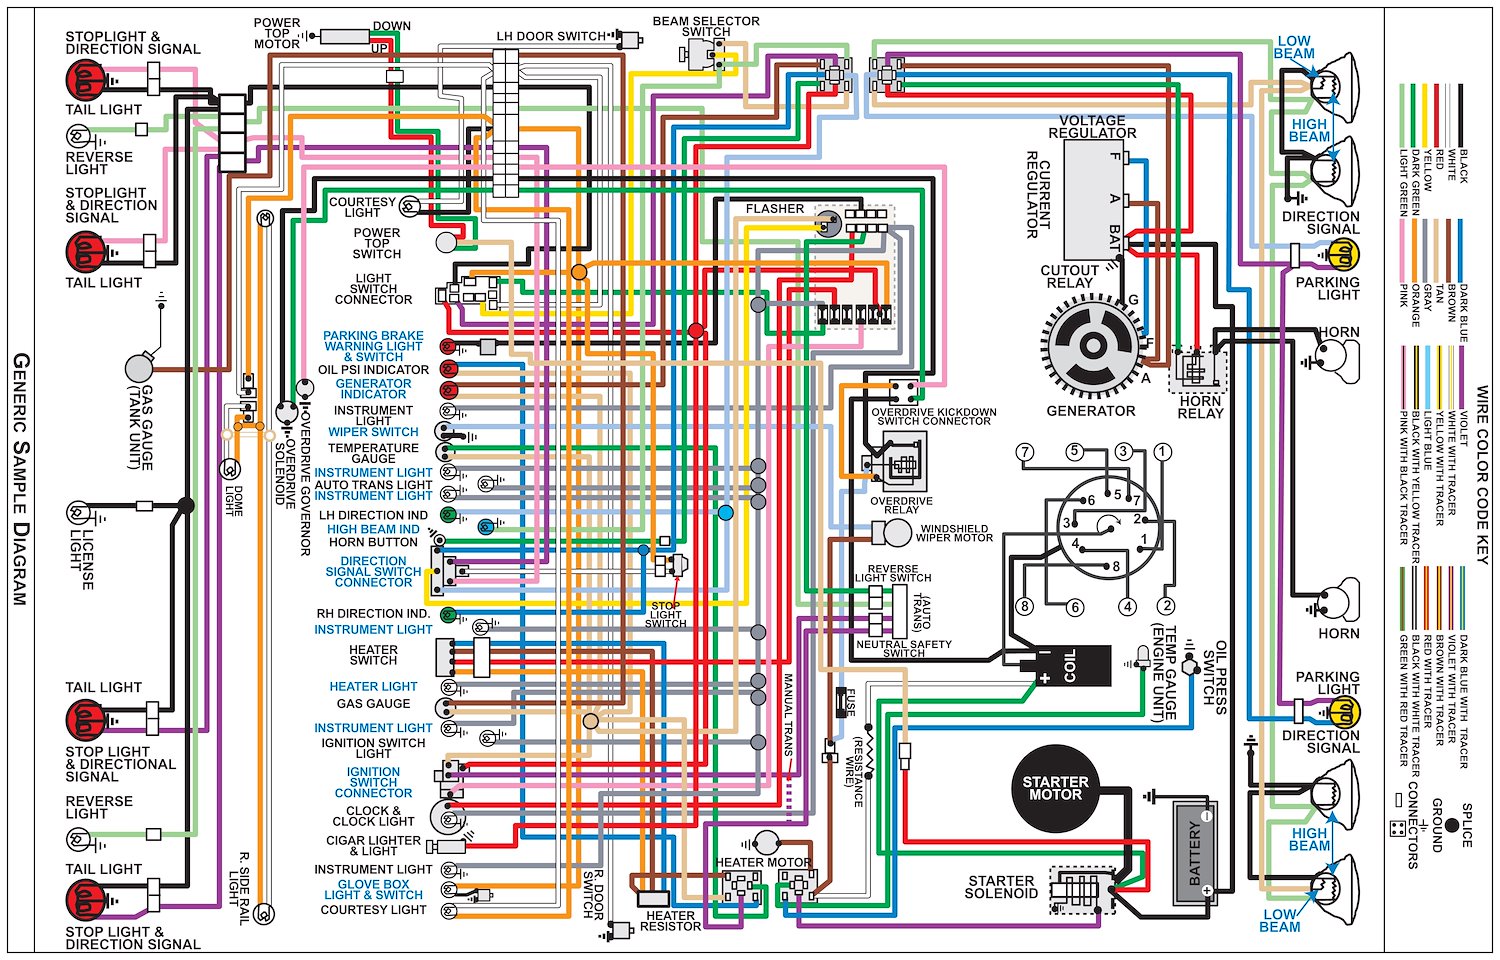 Wiring Diagram for 1934 Dodge DR, 11 in x 17 in., Laminated